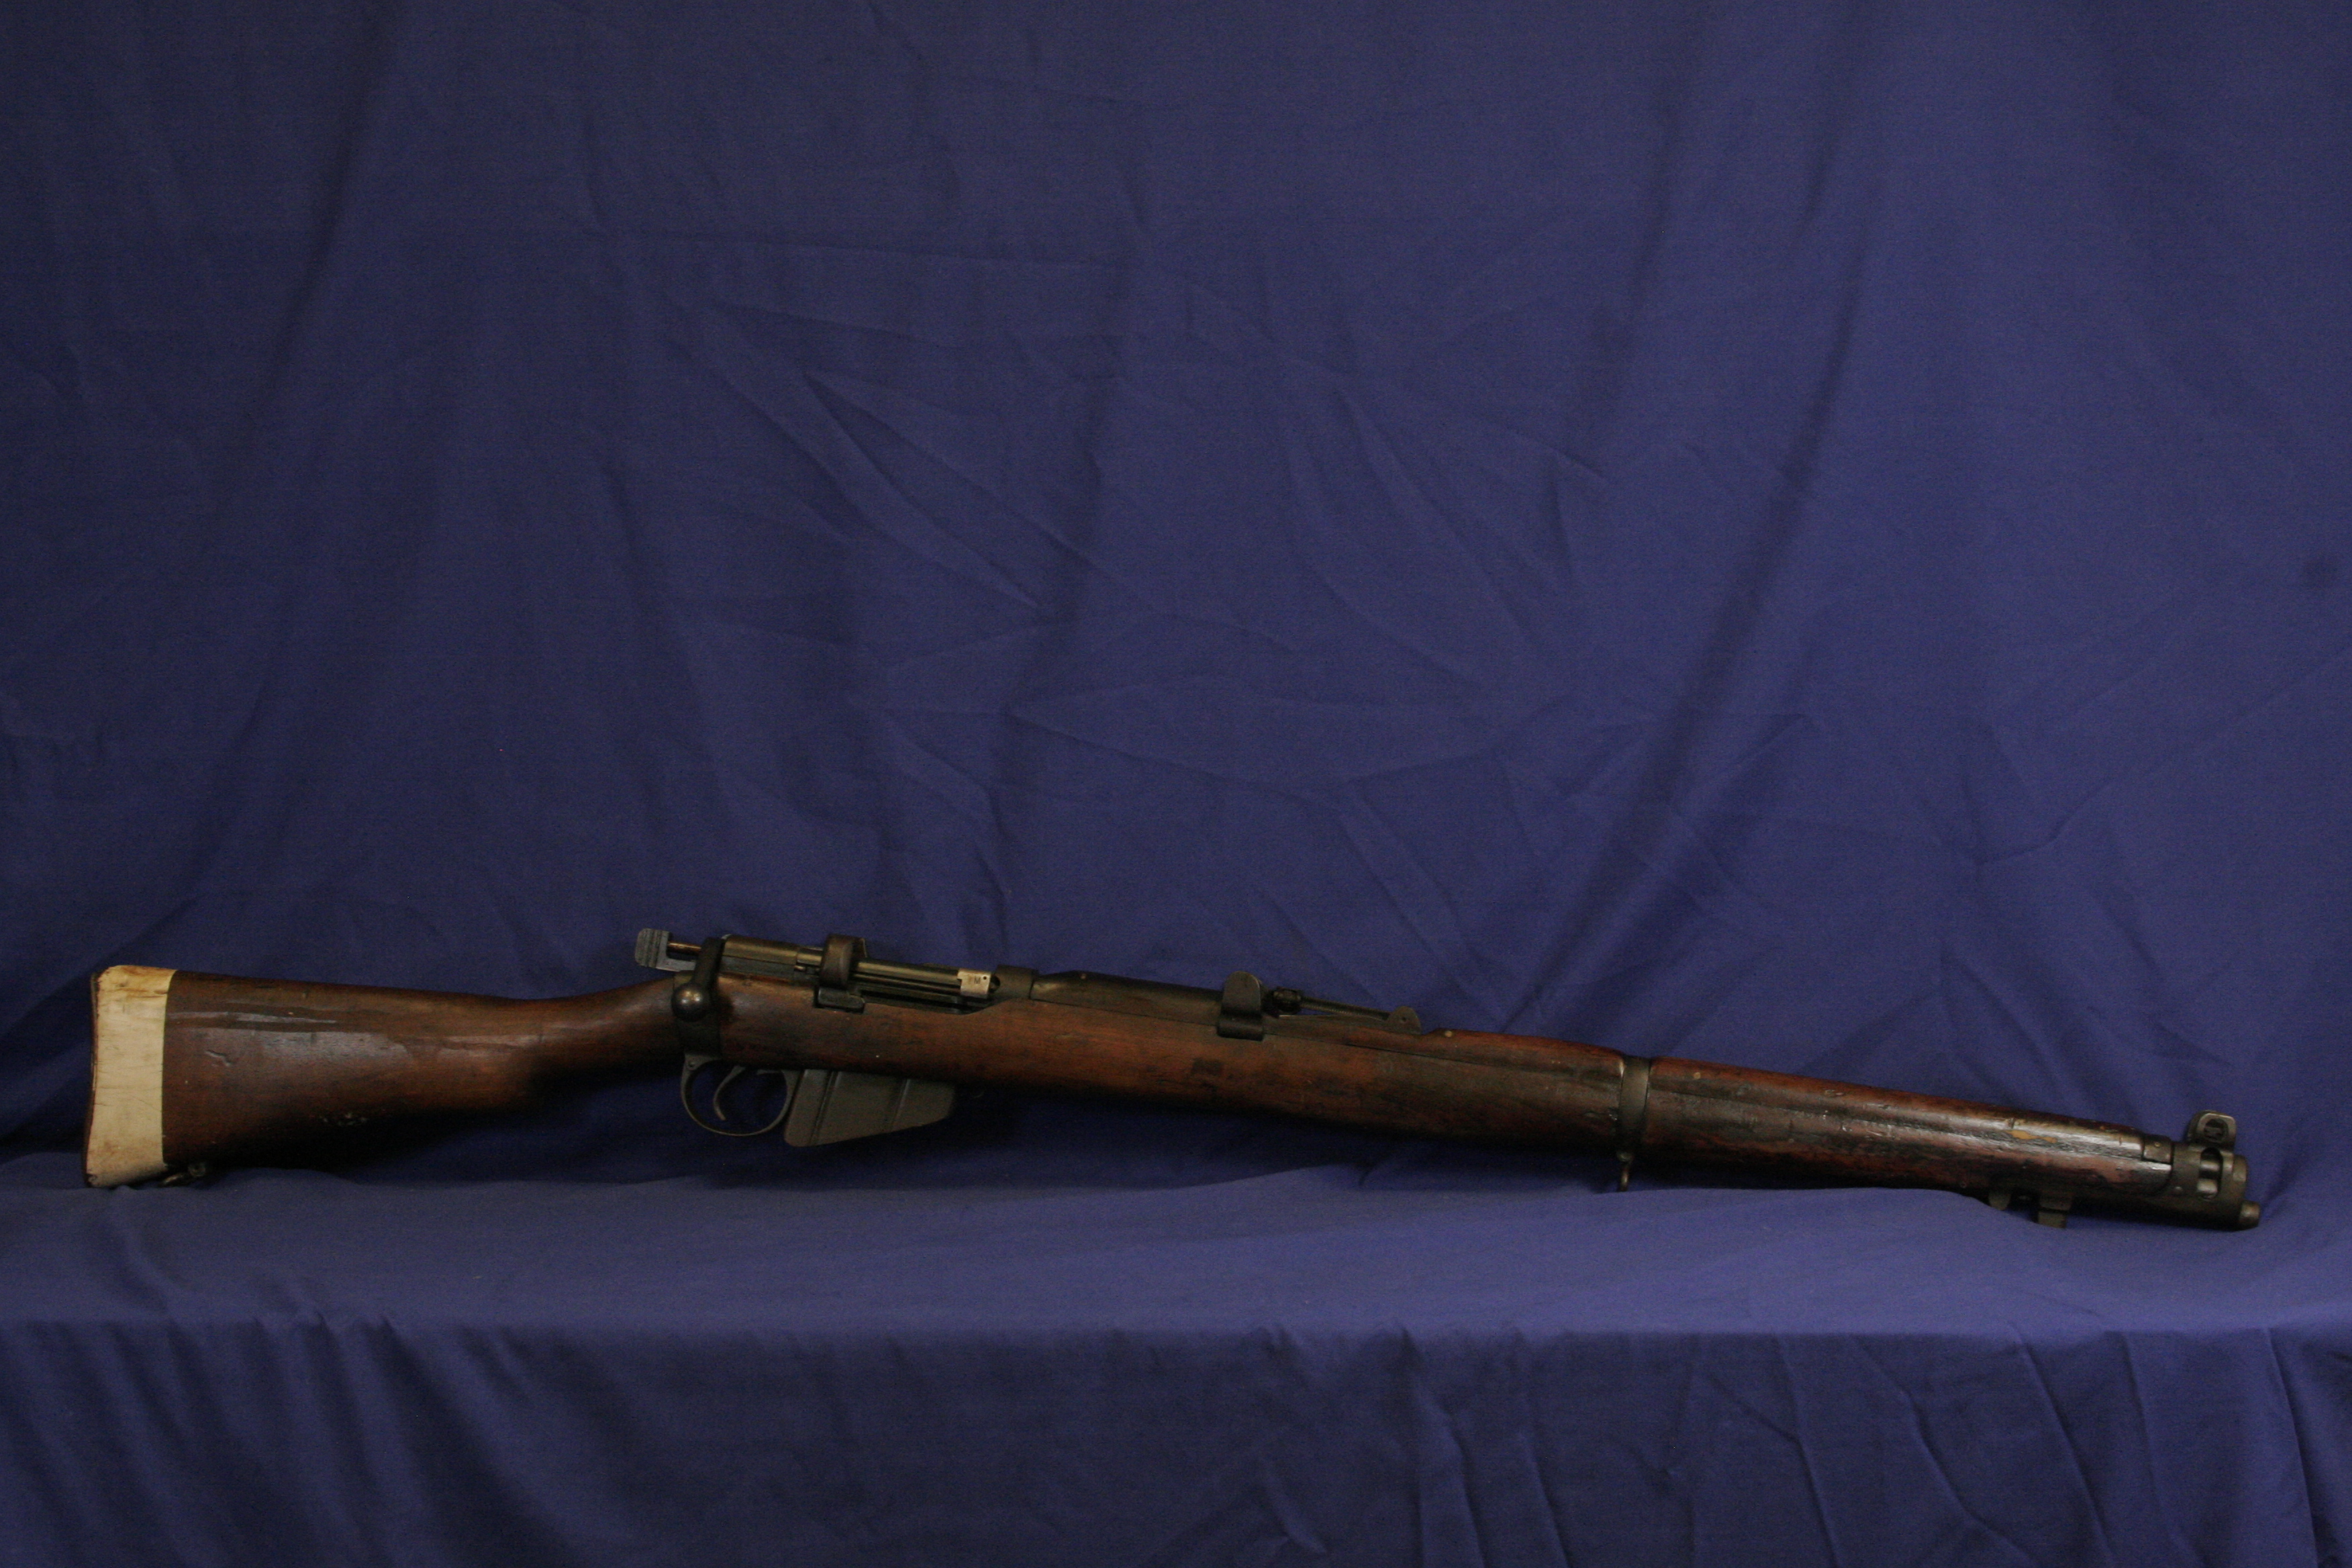 WWII Long Branch Enfield No 4 Mk I .303 Rifle Auctions